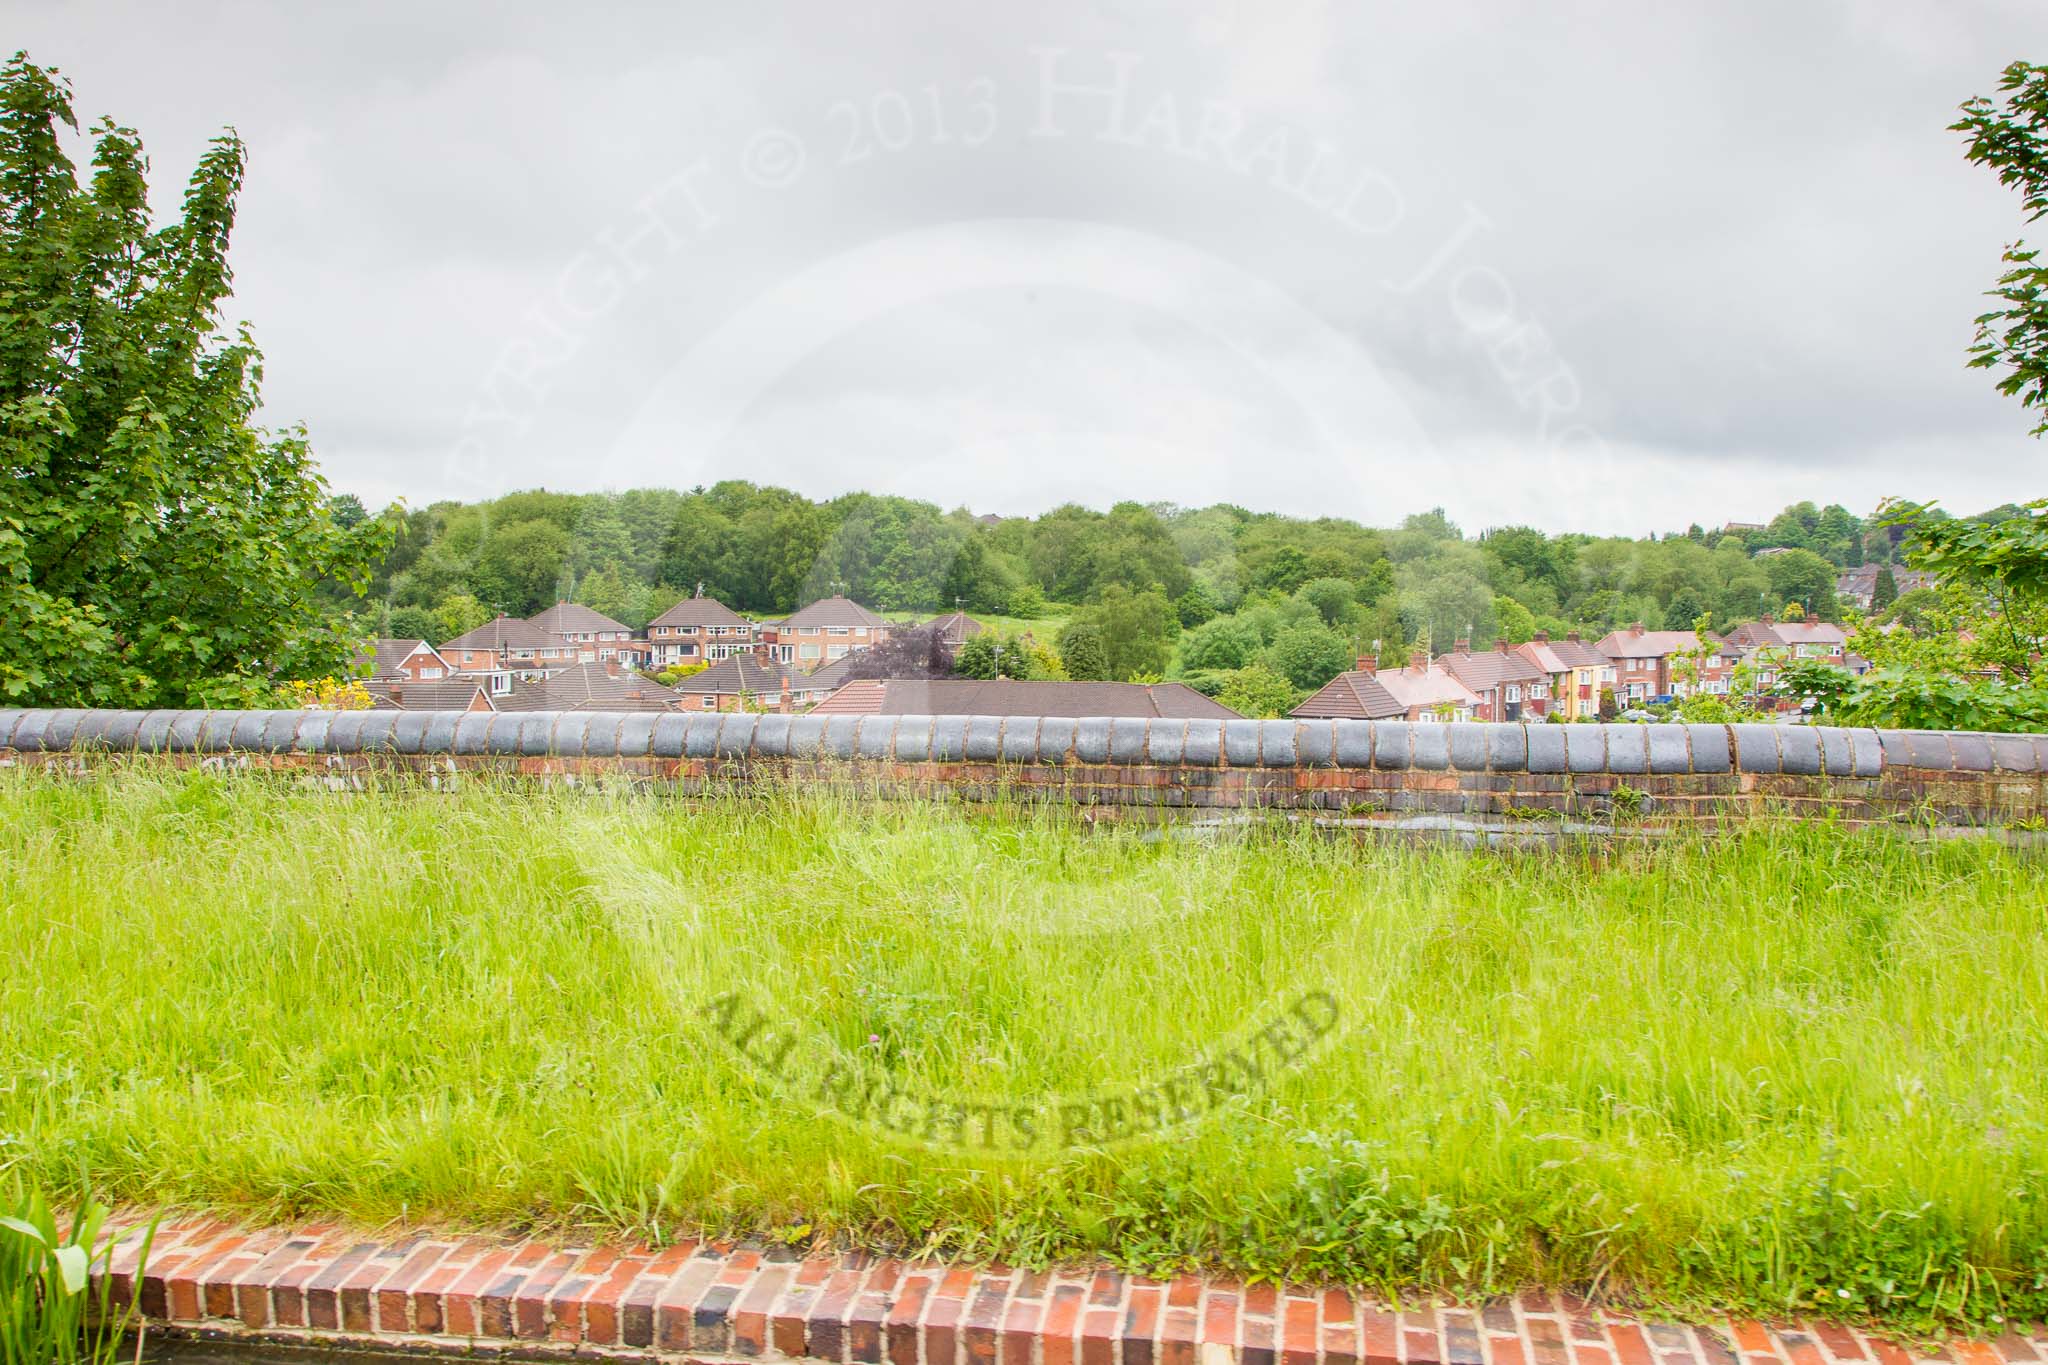 BCN Marathon Challenge 2014: The Tame Valley Canal, as one of the last parts of the BCN to be built, has a dead straight summit level, here on an embankment overlooking local housing at Great Barr.
Birmingham Canal Navigation,


United Kingdom,
on 24 May 2014 at 14:35, image #128